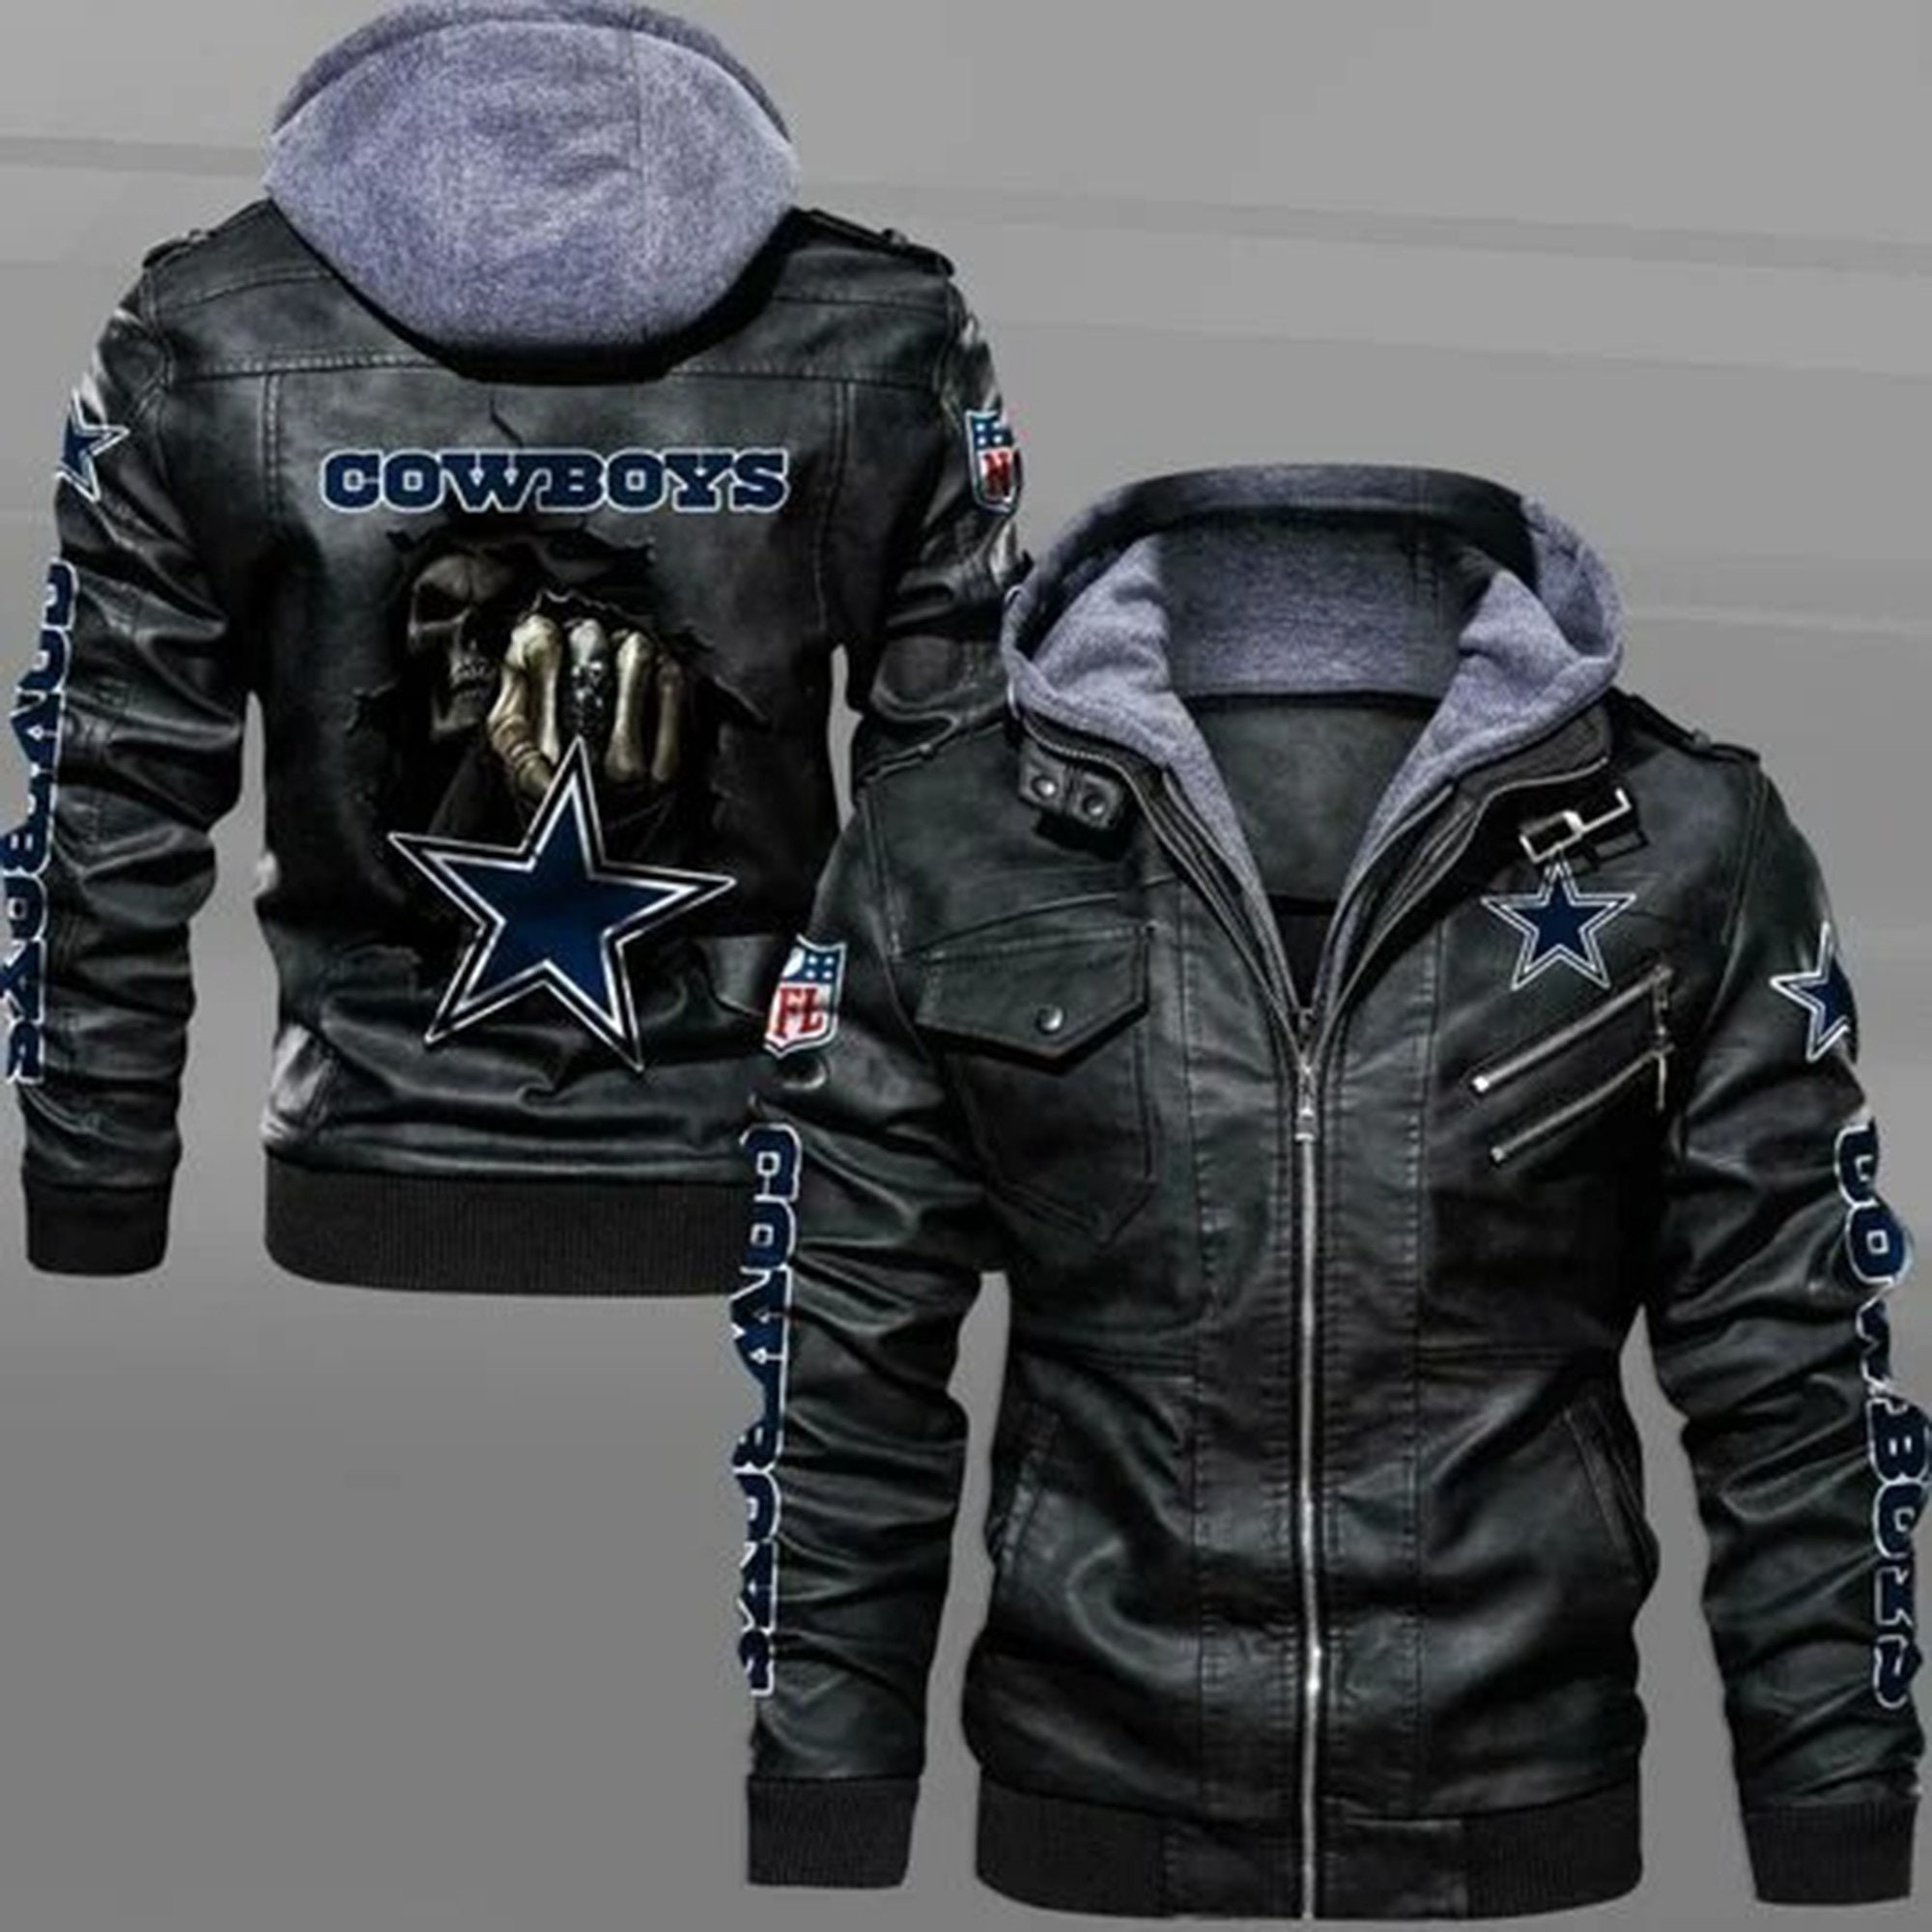 These Amazing Leather Jacket will add to the appeal of your outfit 161